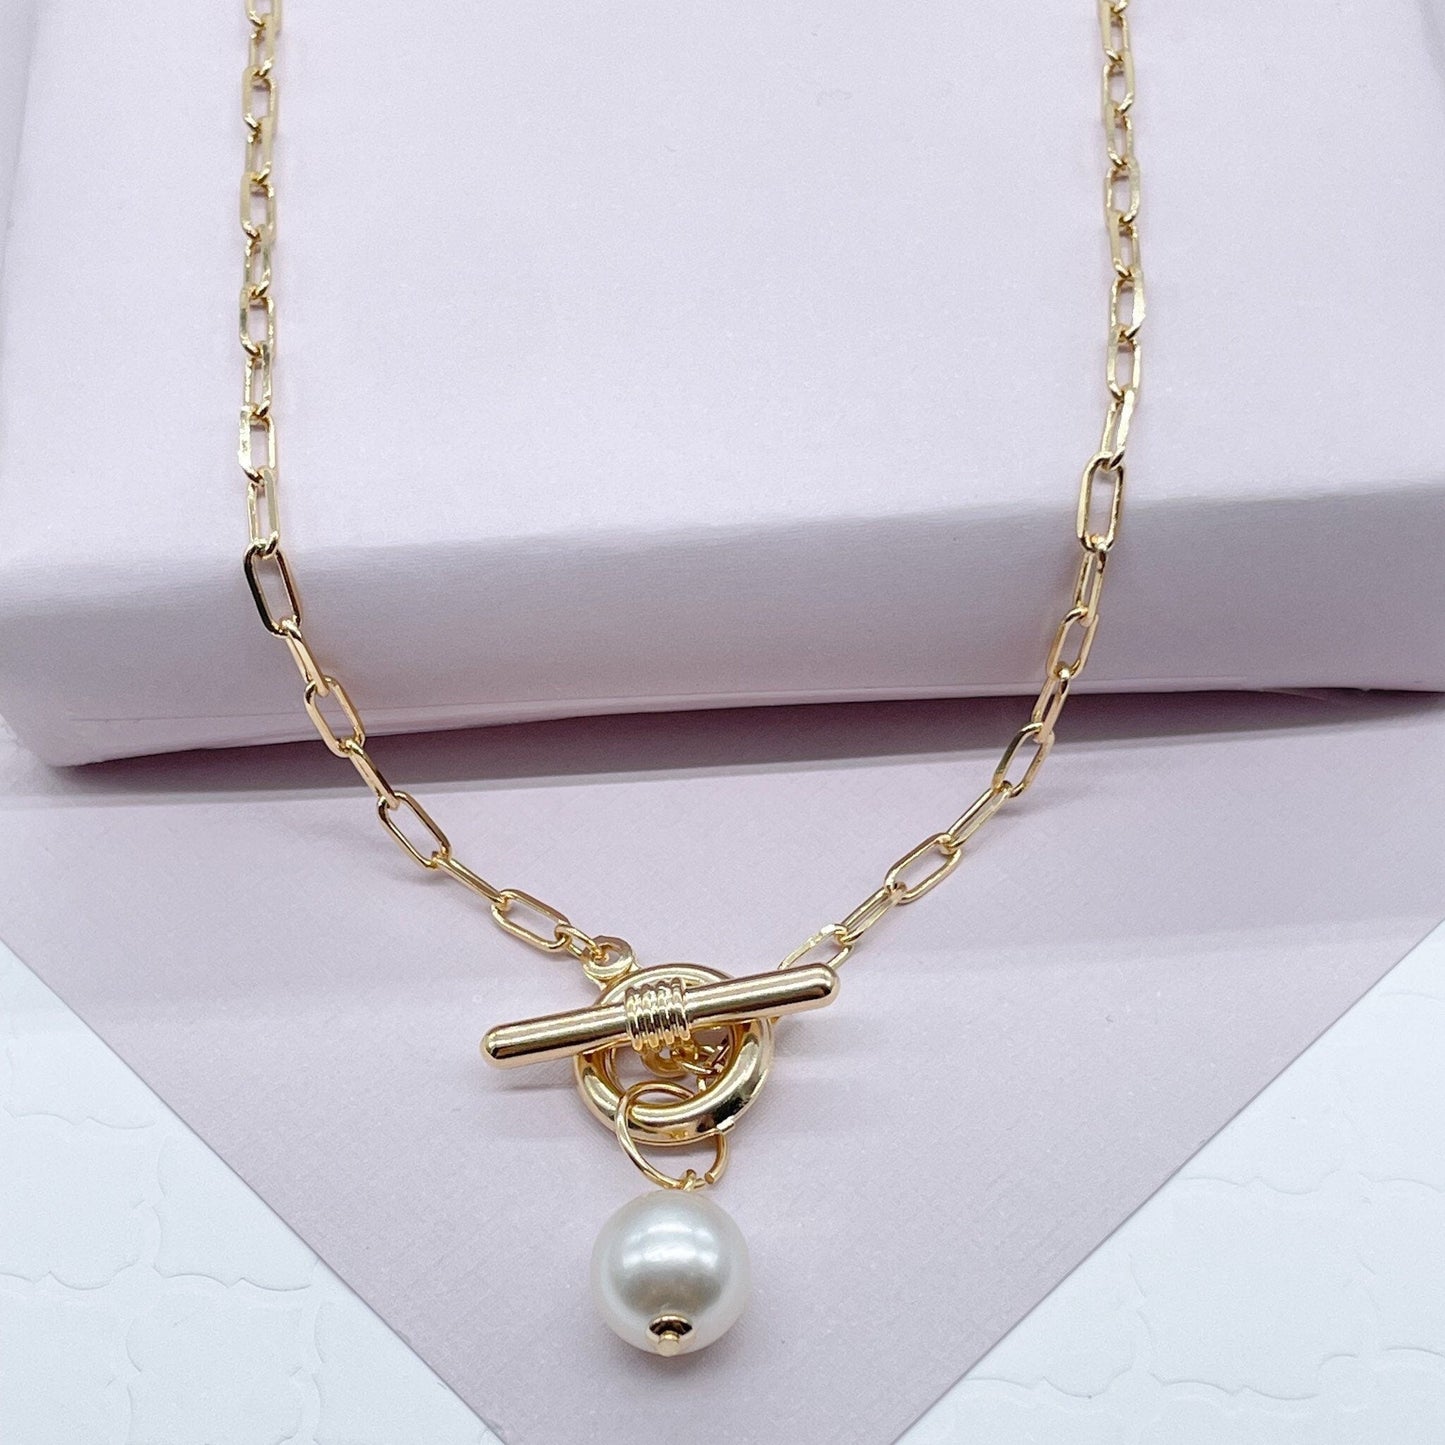 18k Gold Layered Thin Paper Clip Necklace Lariat Featuring Pearl Toggle Closing